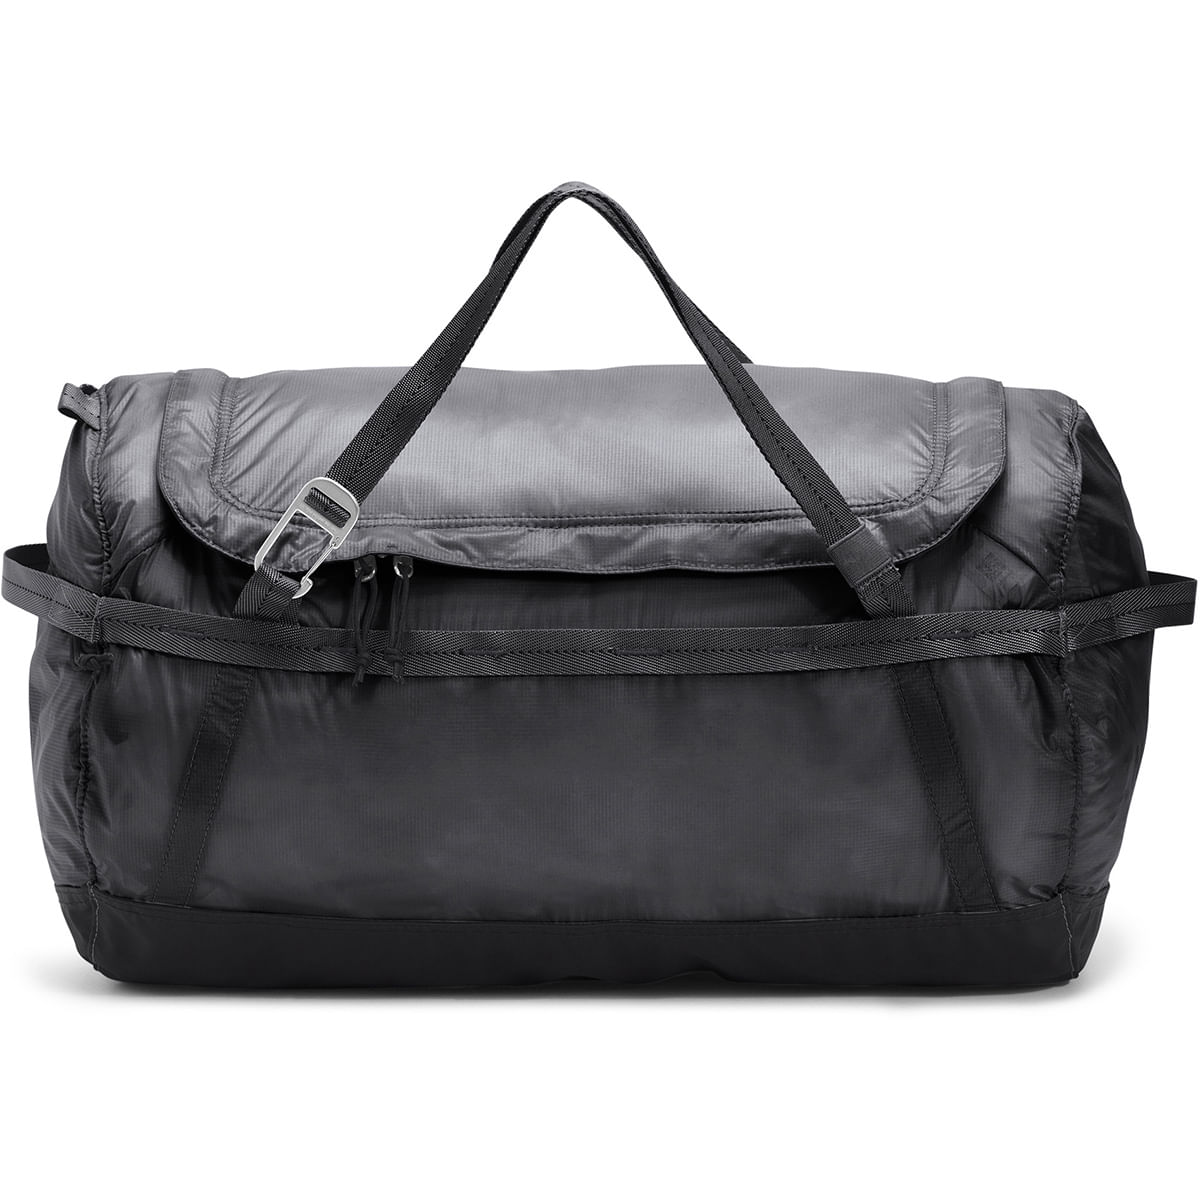 The North Face FLYWEIGHT DUFFEL GREY - Paragon Sports